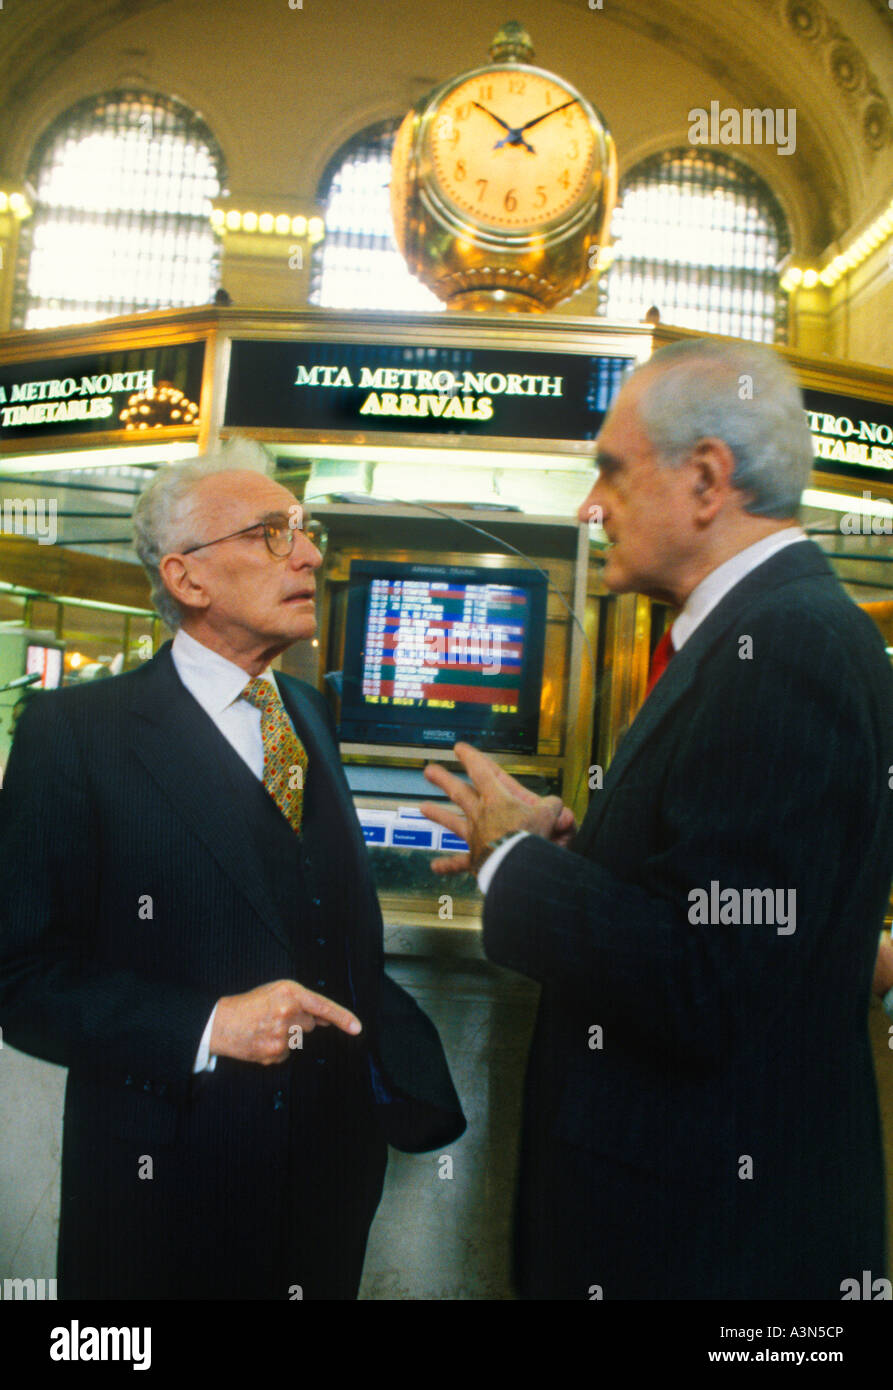 Grand Central Station terminal main concourse New York City. Clock and information booth. Two businessmen talking. Midtown Manhattan USA Stock Photo